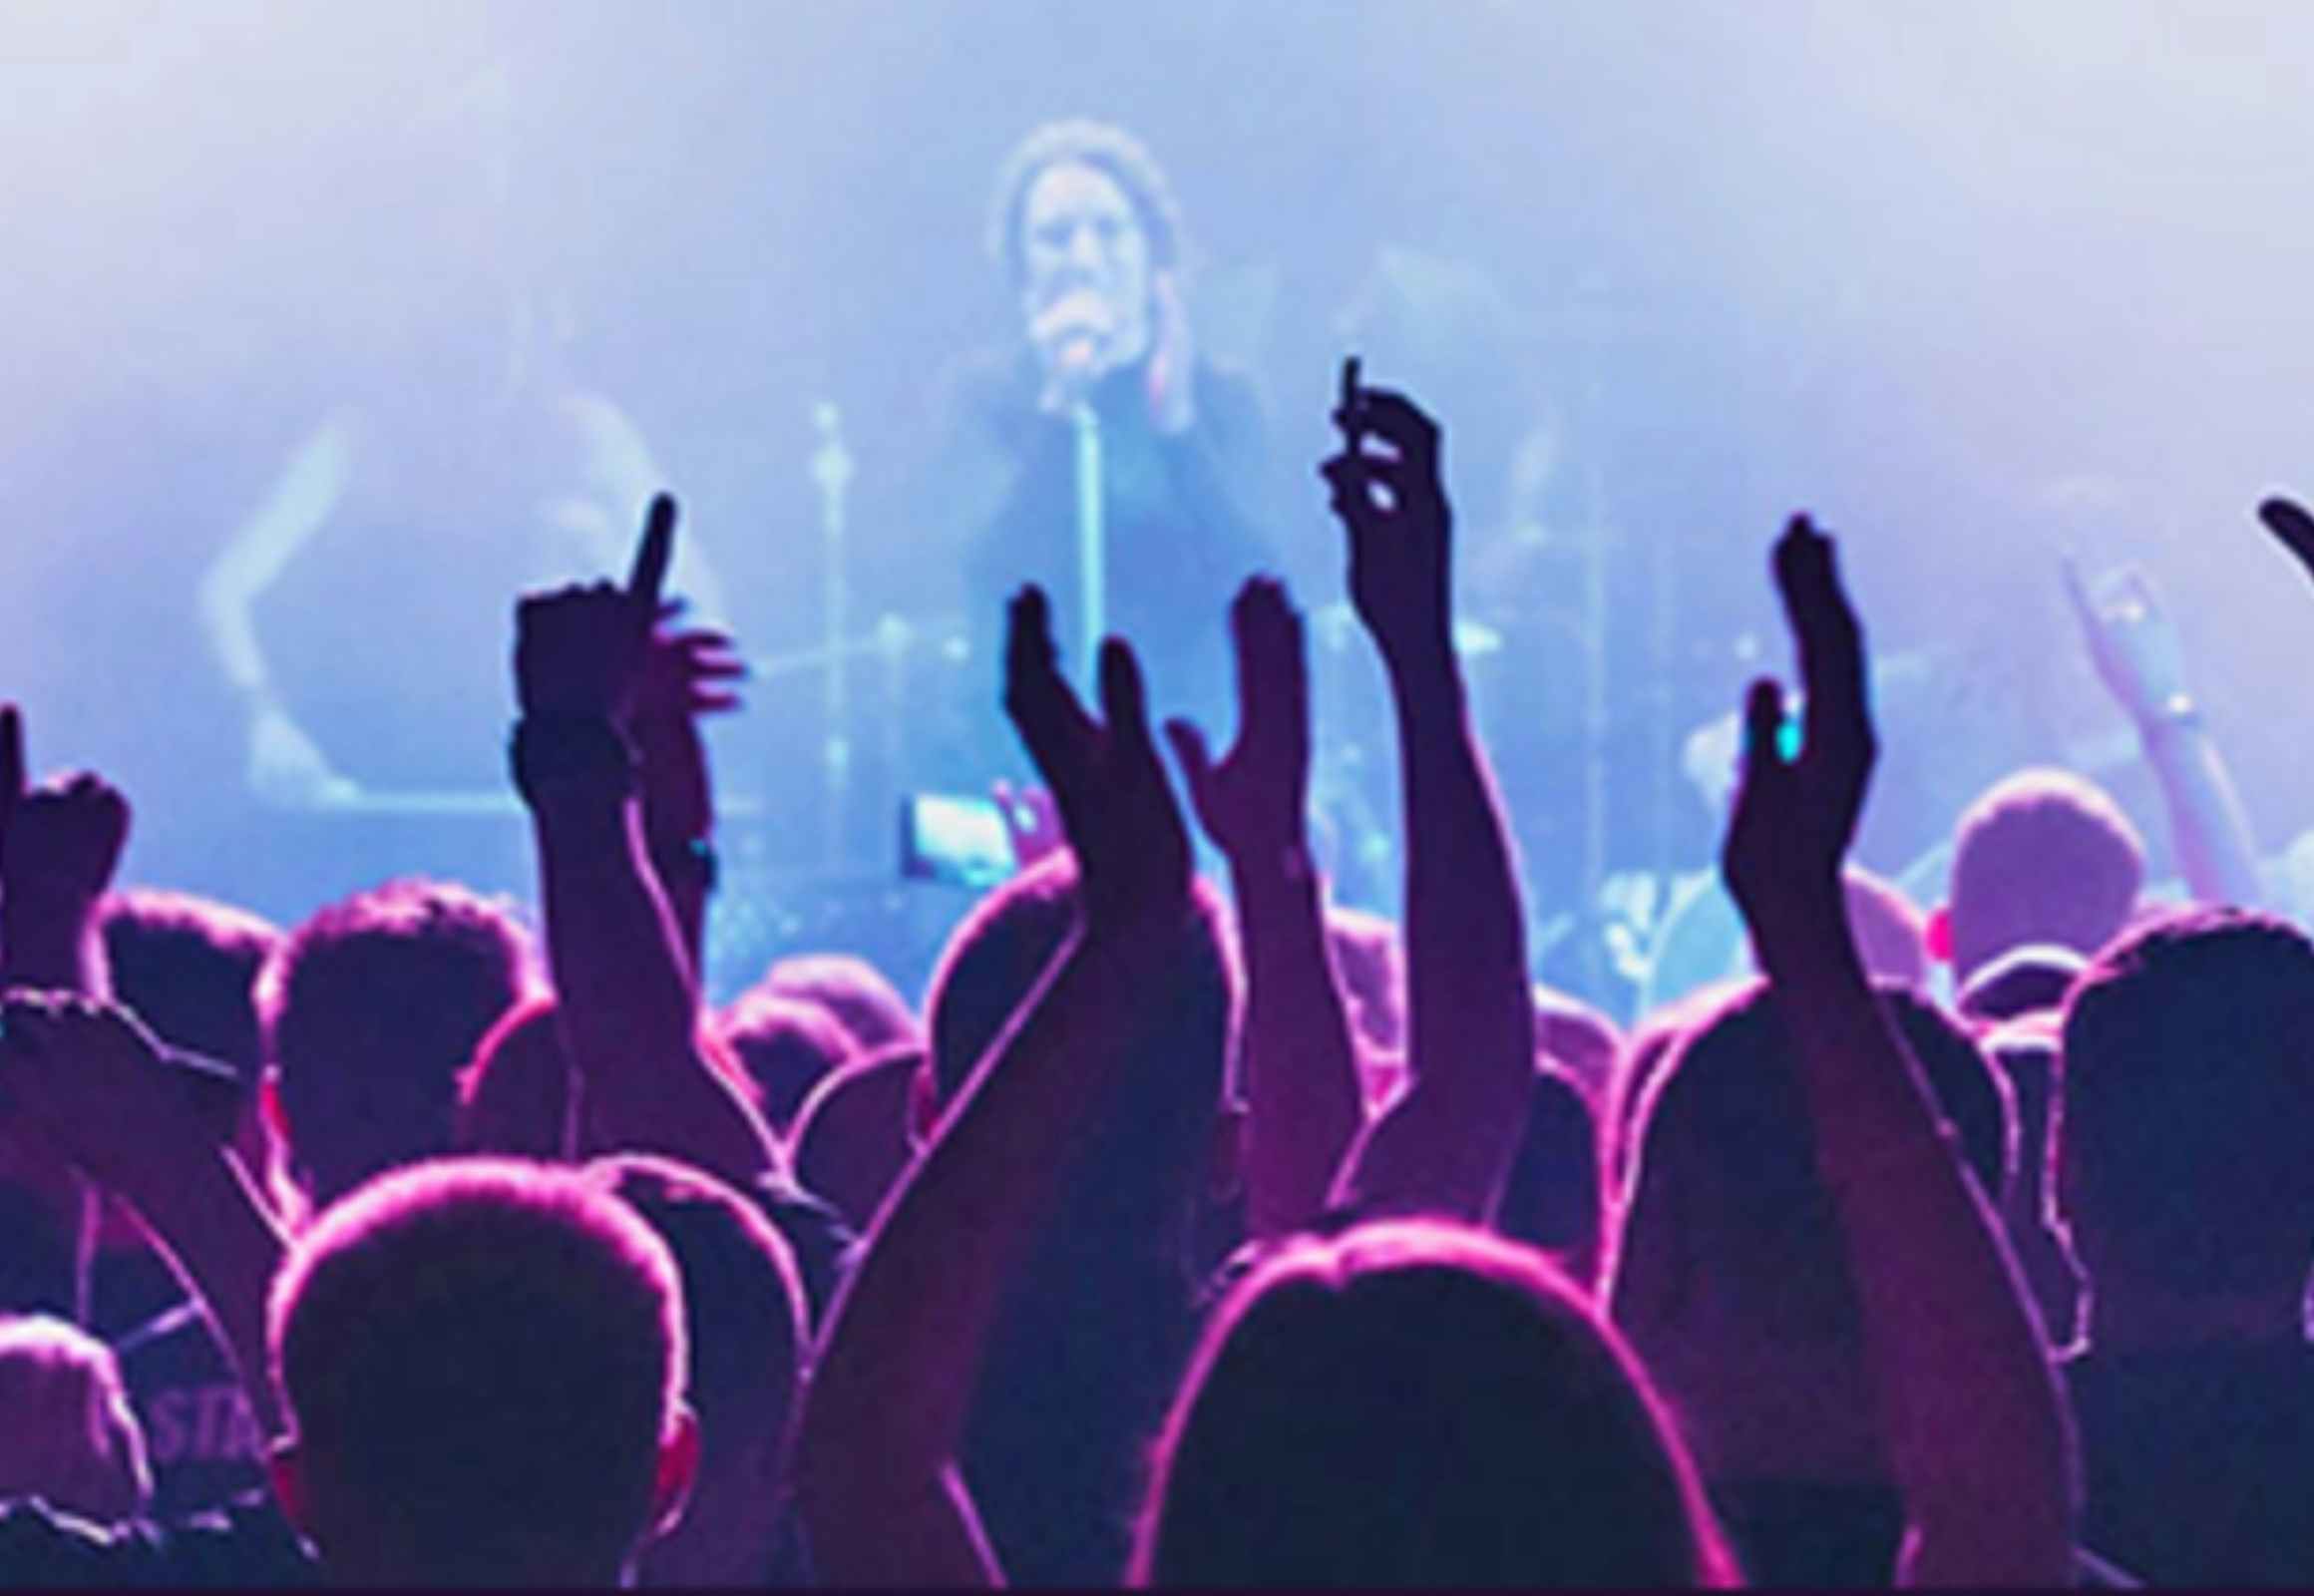 Live Nation Concert Tickets, Now Starting at $20 at Groupon